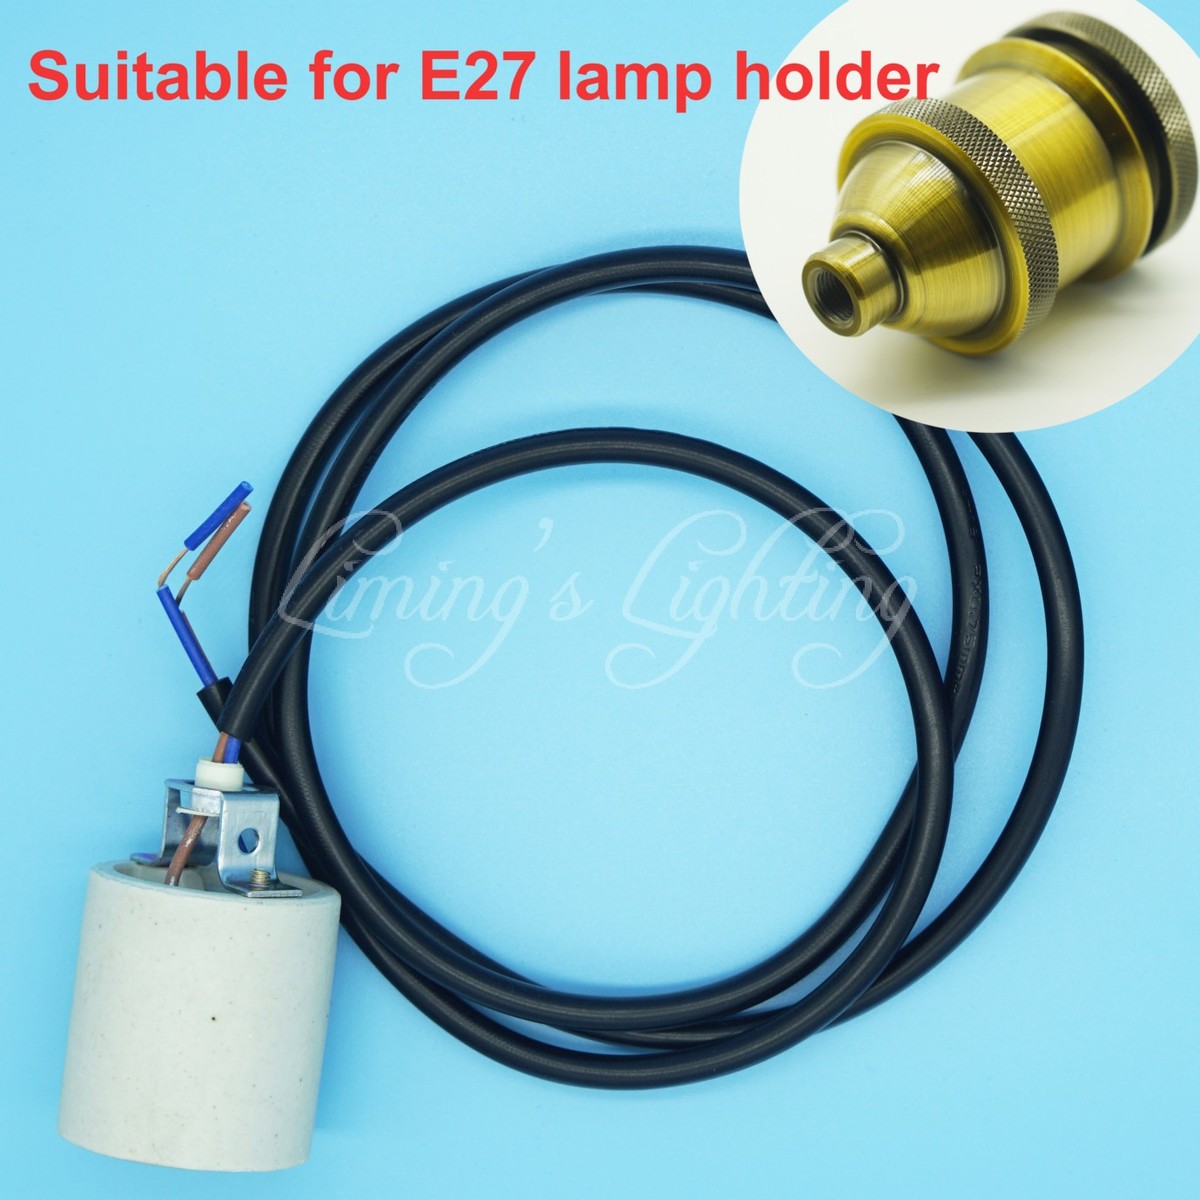 e27 lamp holder lighting accessories white e27 ceramic lamp holder with 1m pvc cable wire for diy pendant light lamp base